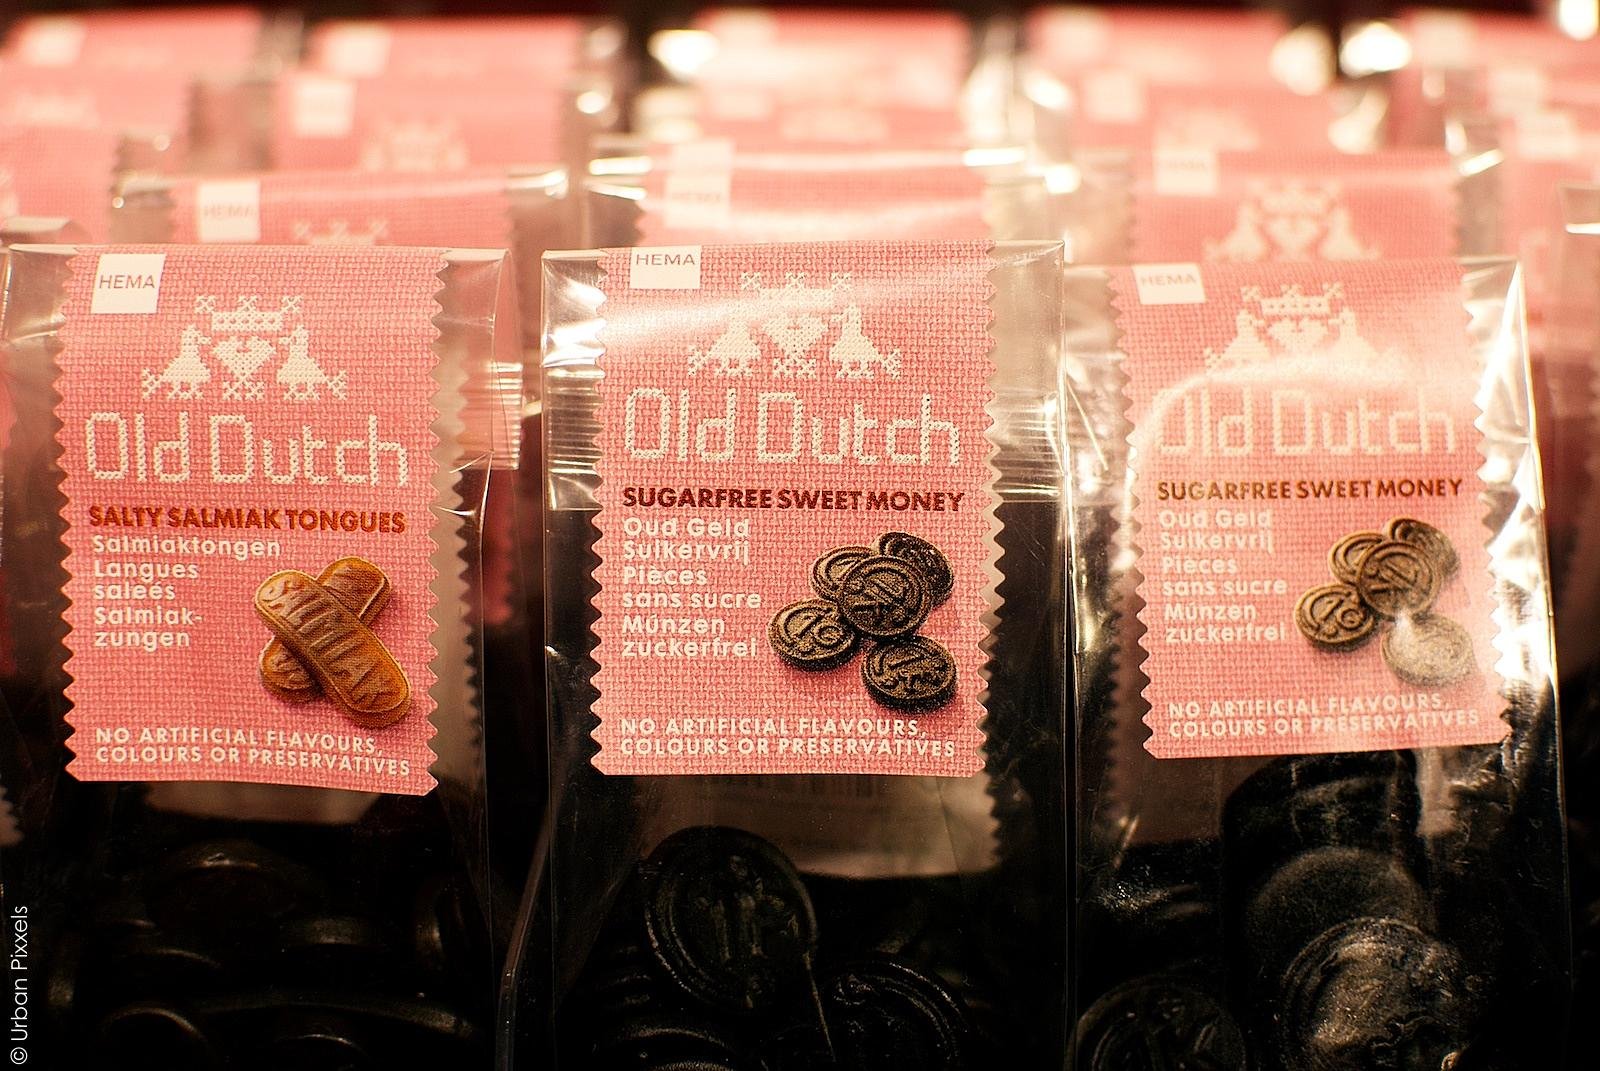 Old Dutch sweets at the HEMA in London